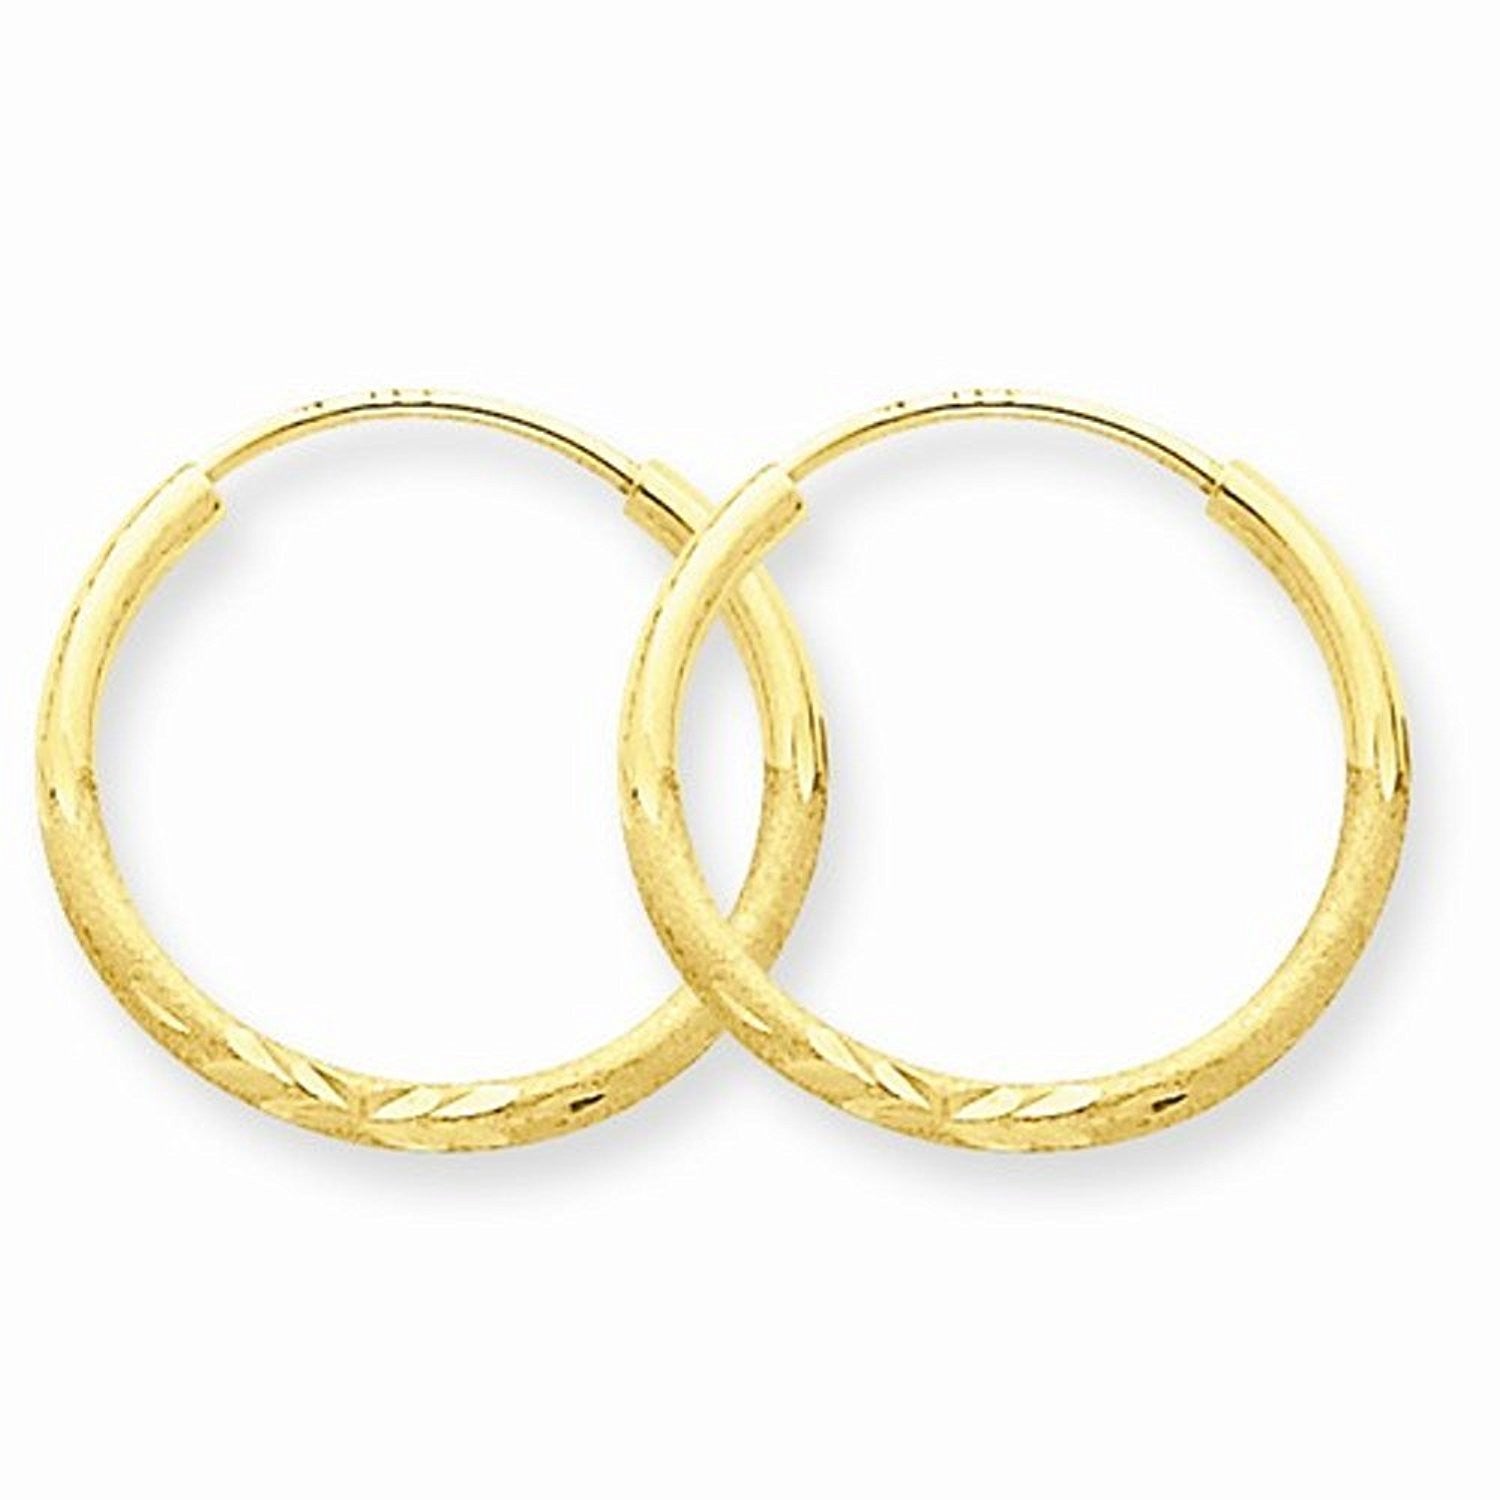 14K Yellow Gold 15mm x 1.5mm Round Endless Hoop Earrings